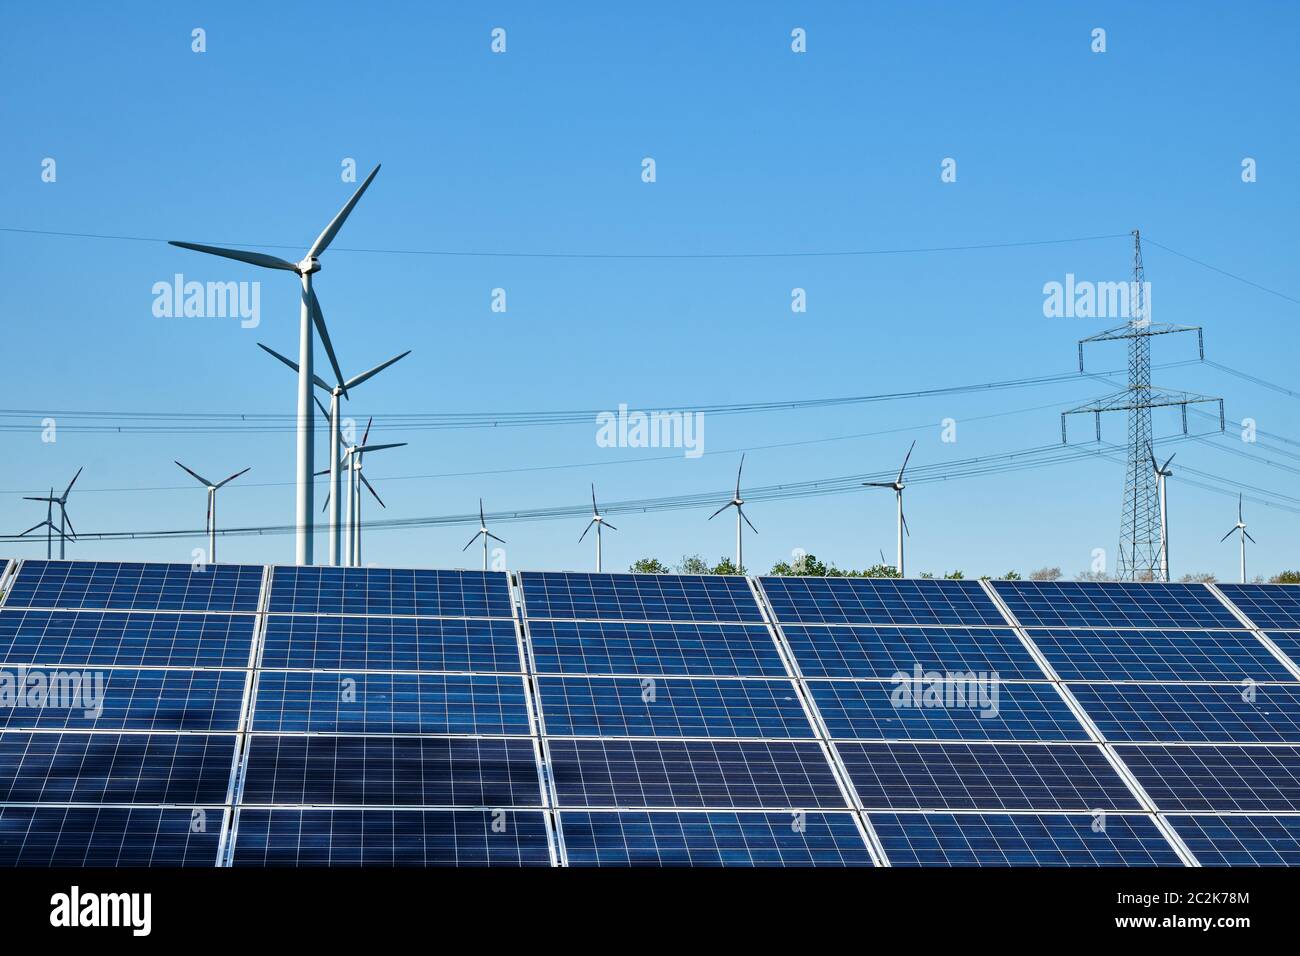 Solar panels, wind turbines and overhead power lines seen in Germany Stock Photo